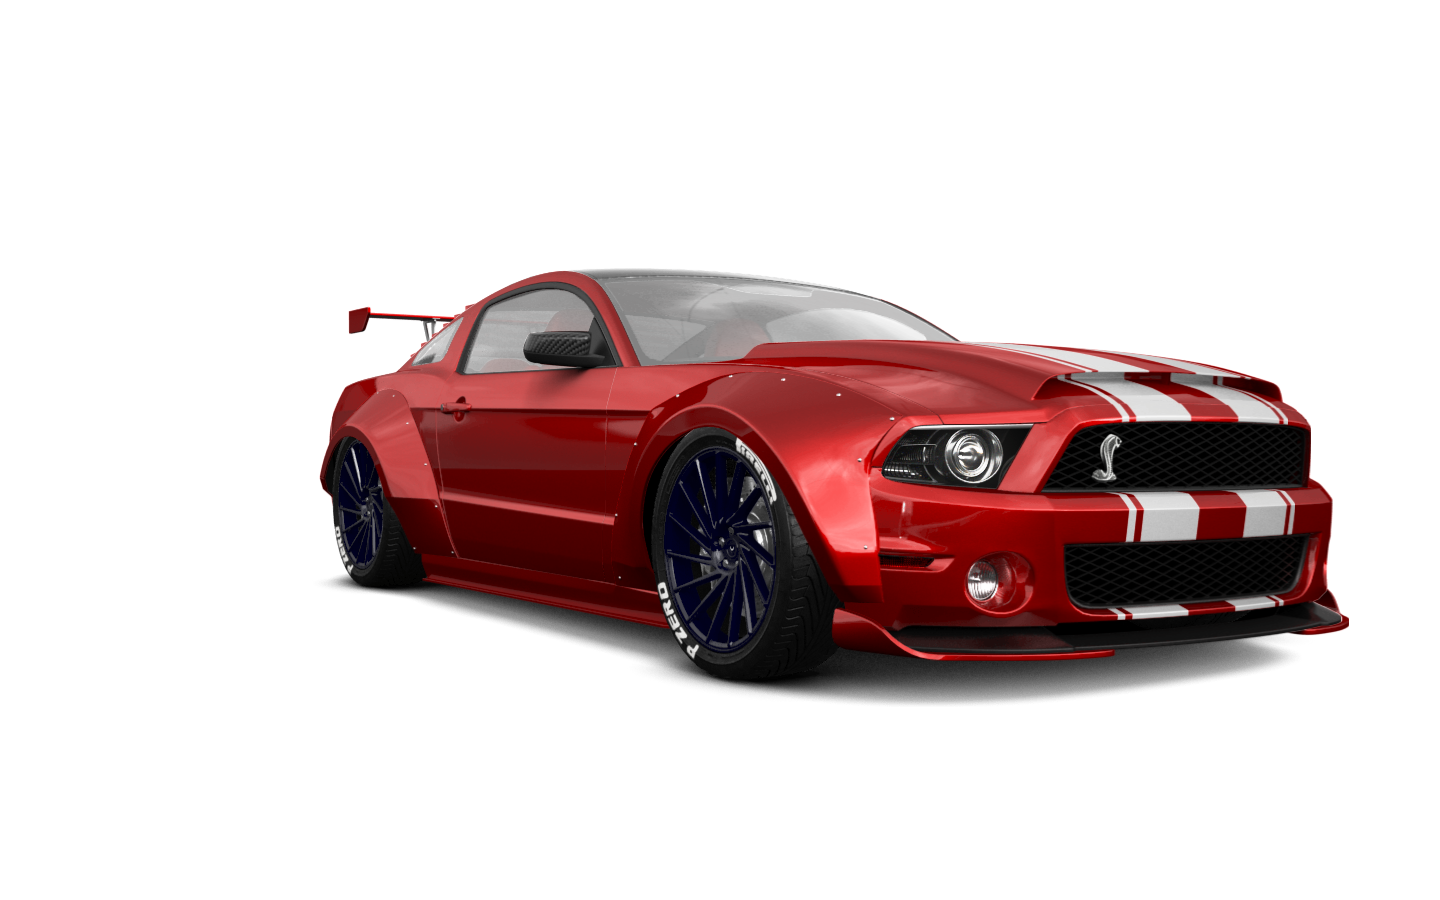 Ford Mustang 2 Door Coupe 2010